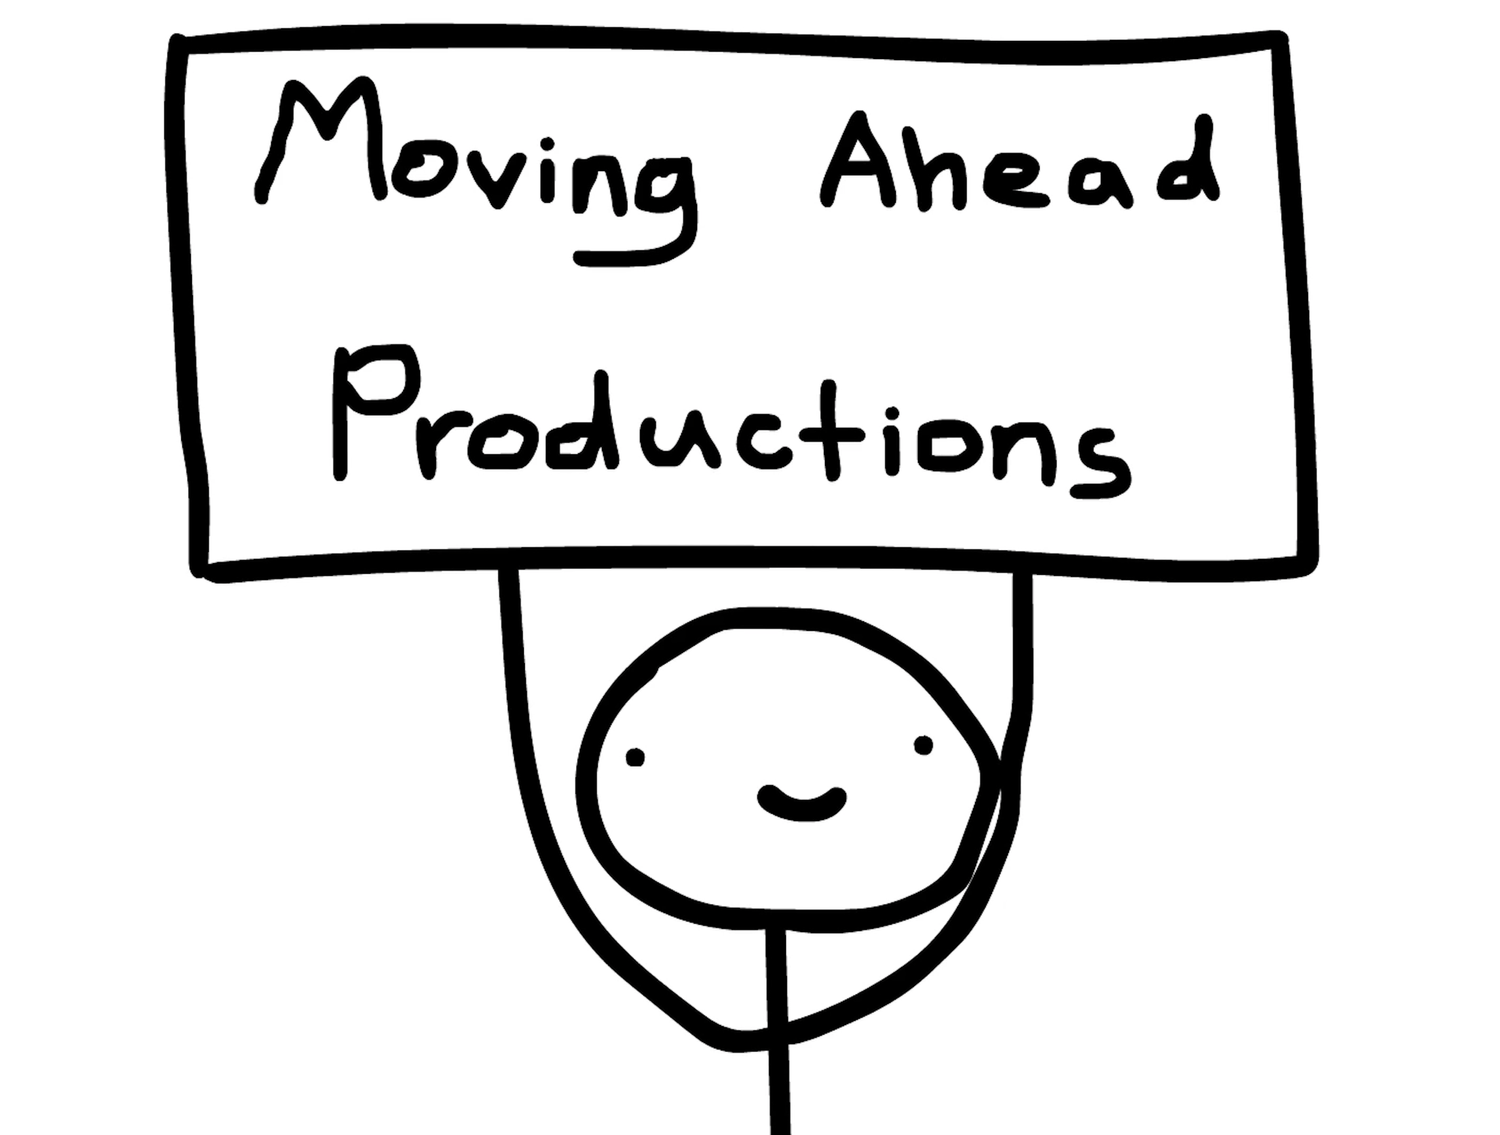 Moving Ahead Productions